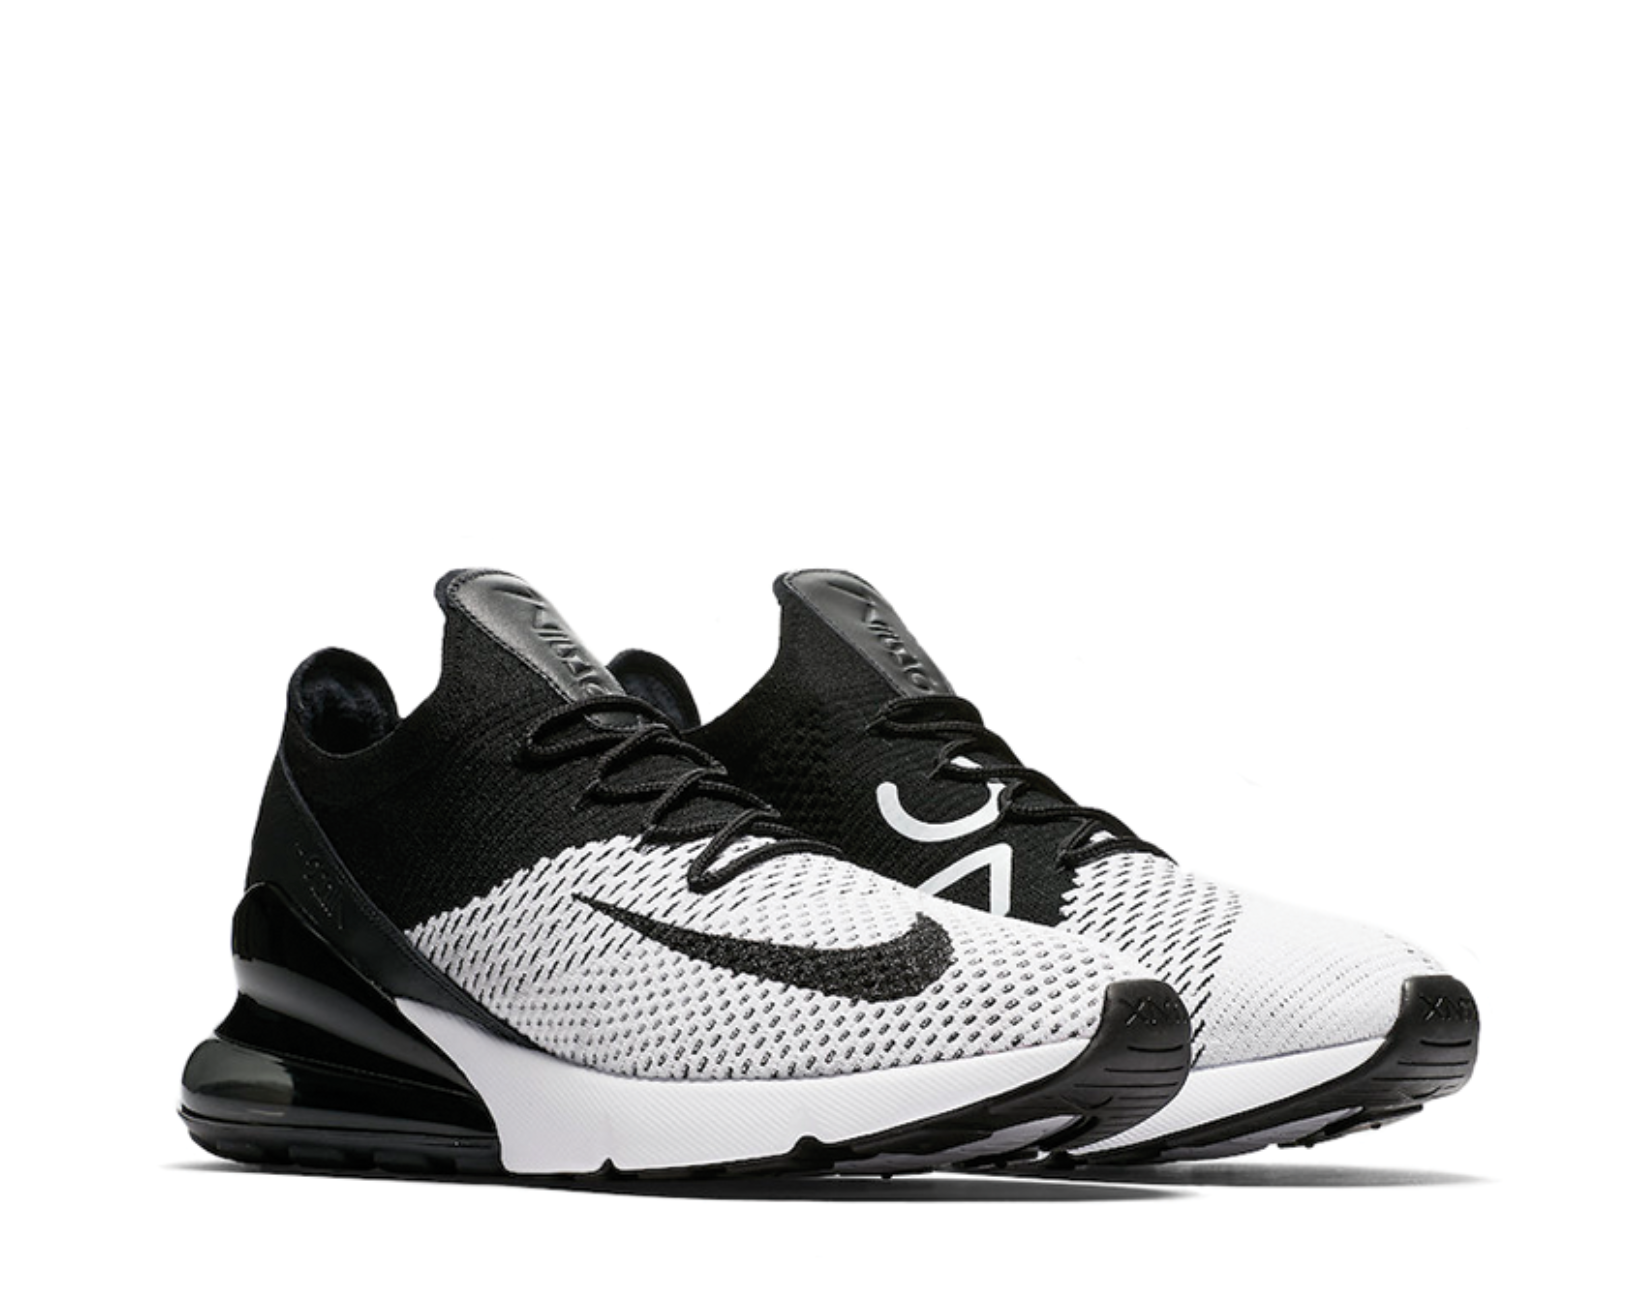 Nike Air Max 270 Flyknit White Black AO1023-100 - NOIRFONCE